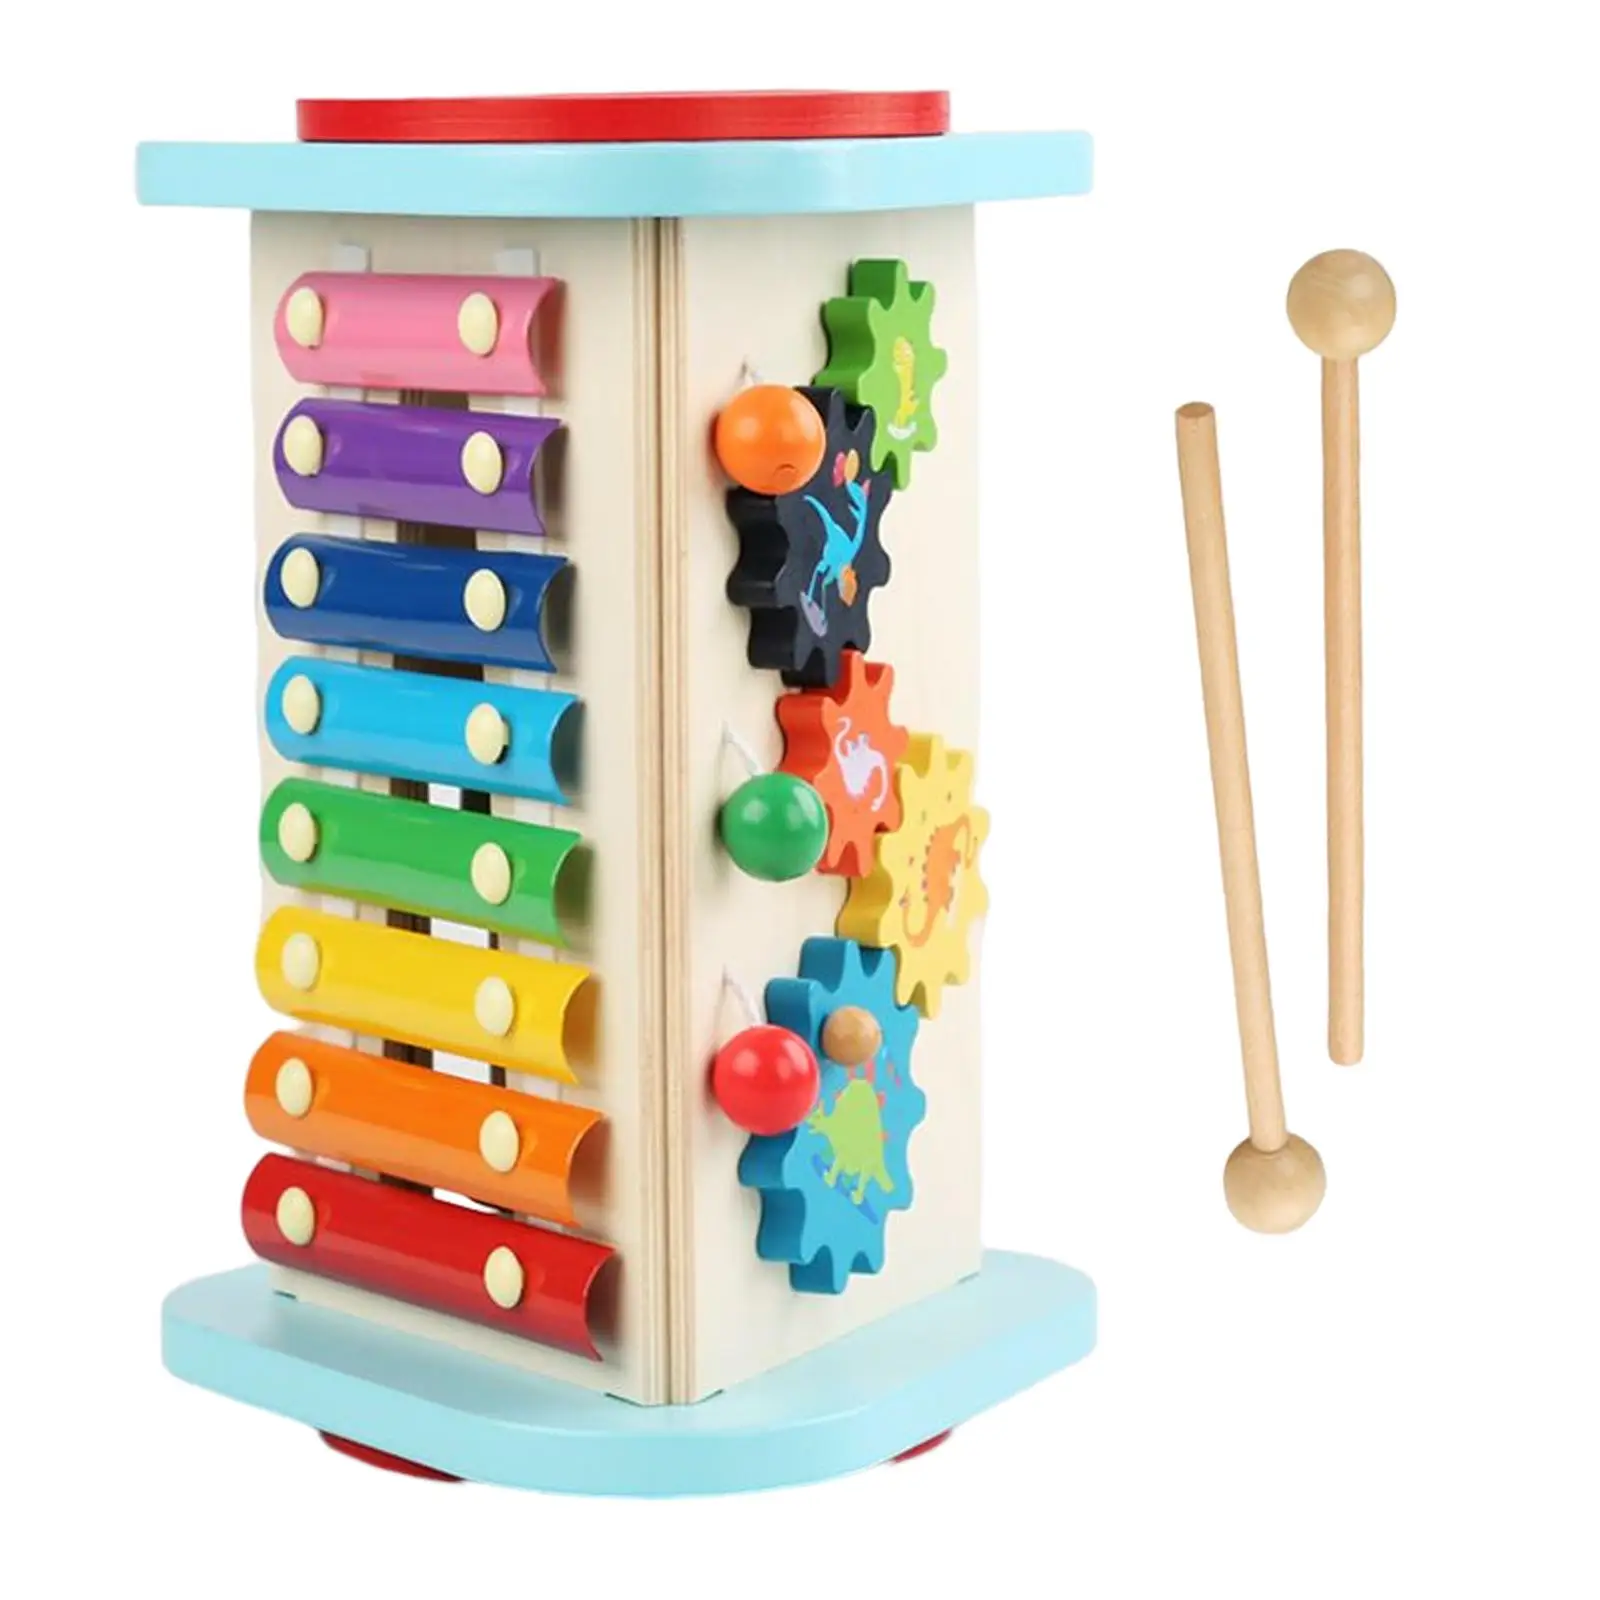 5 in 1 Wooden Music Toy Early Learning Fine Motor Skills Sturdy Colorful Multifunctional Baby Musical Instruments Toy for Gifts